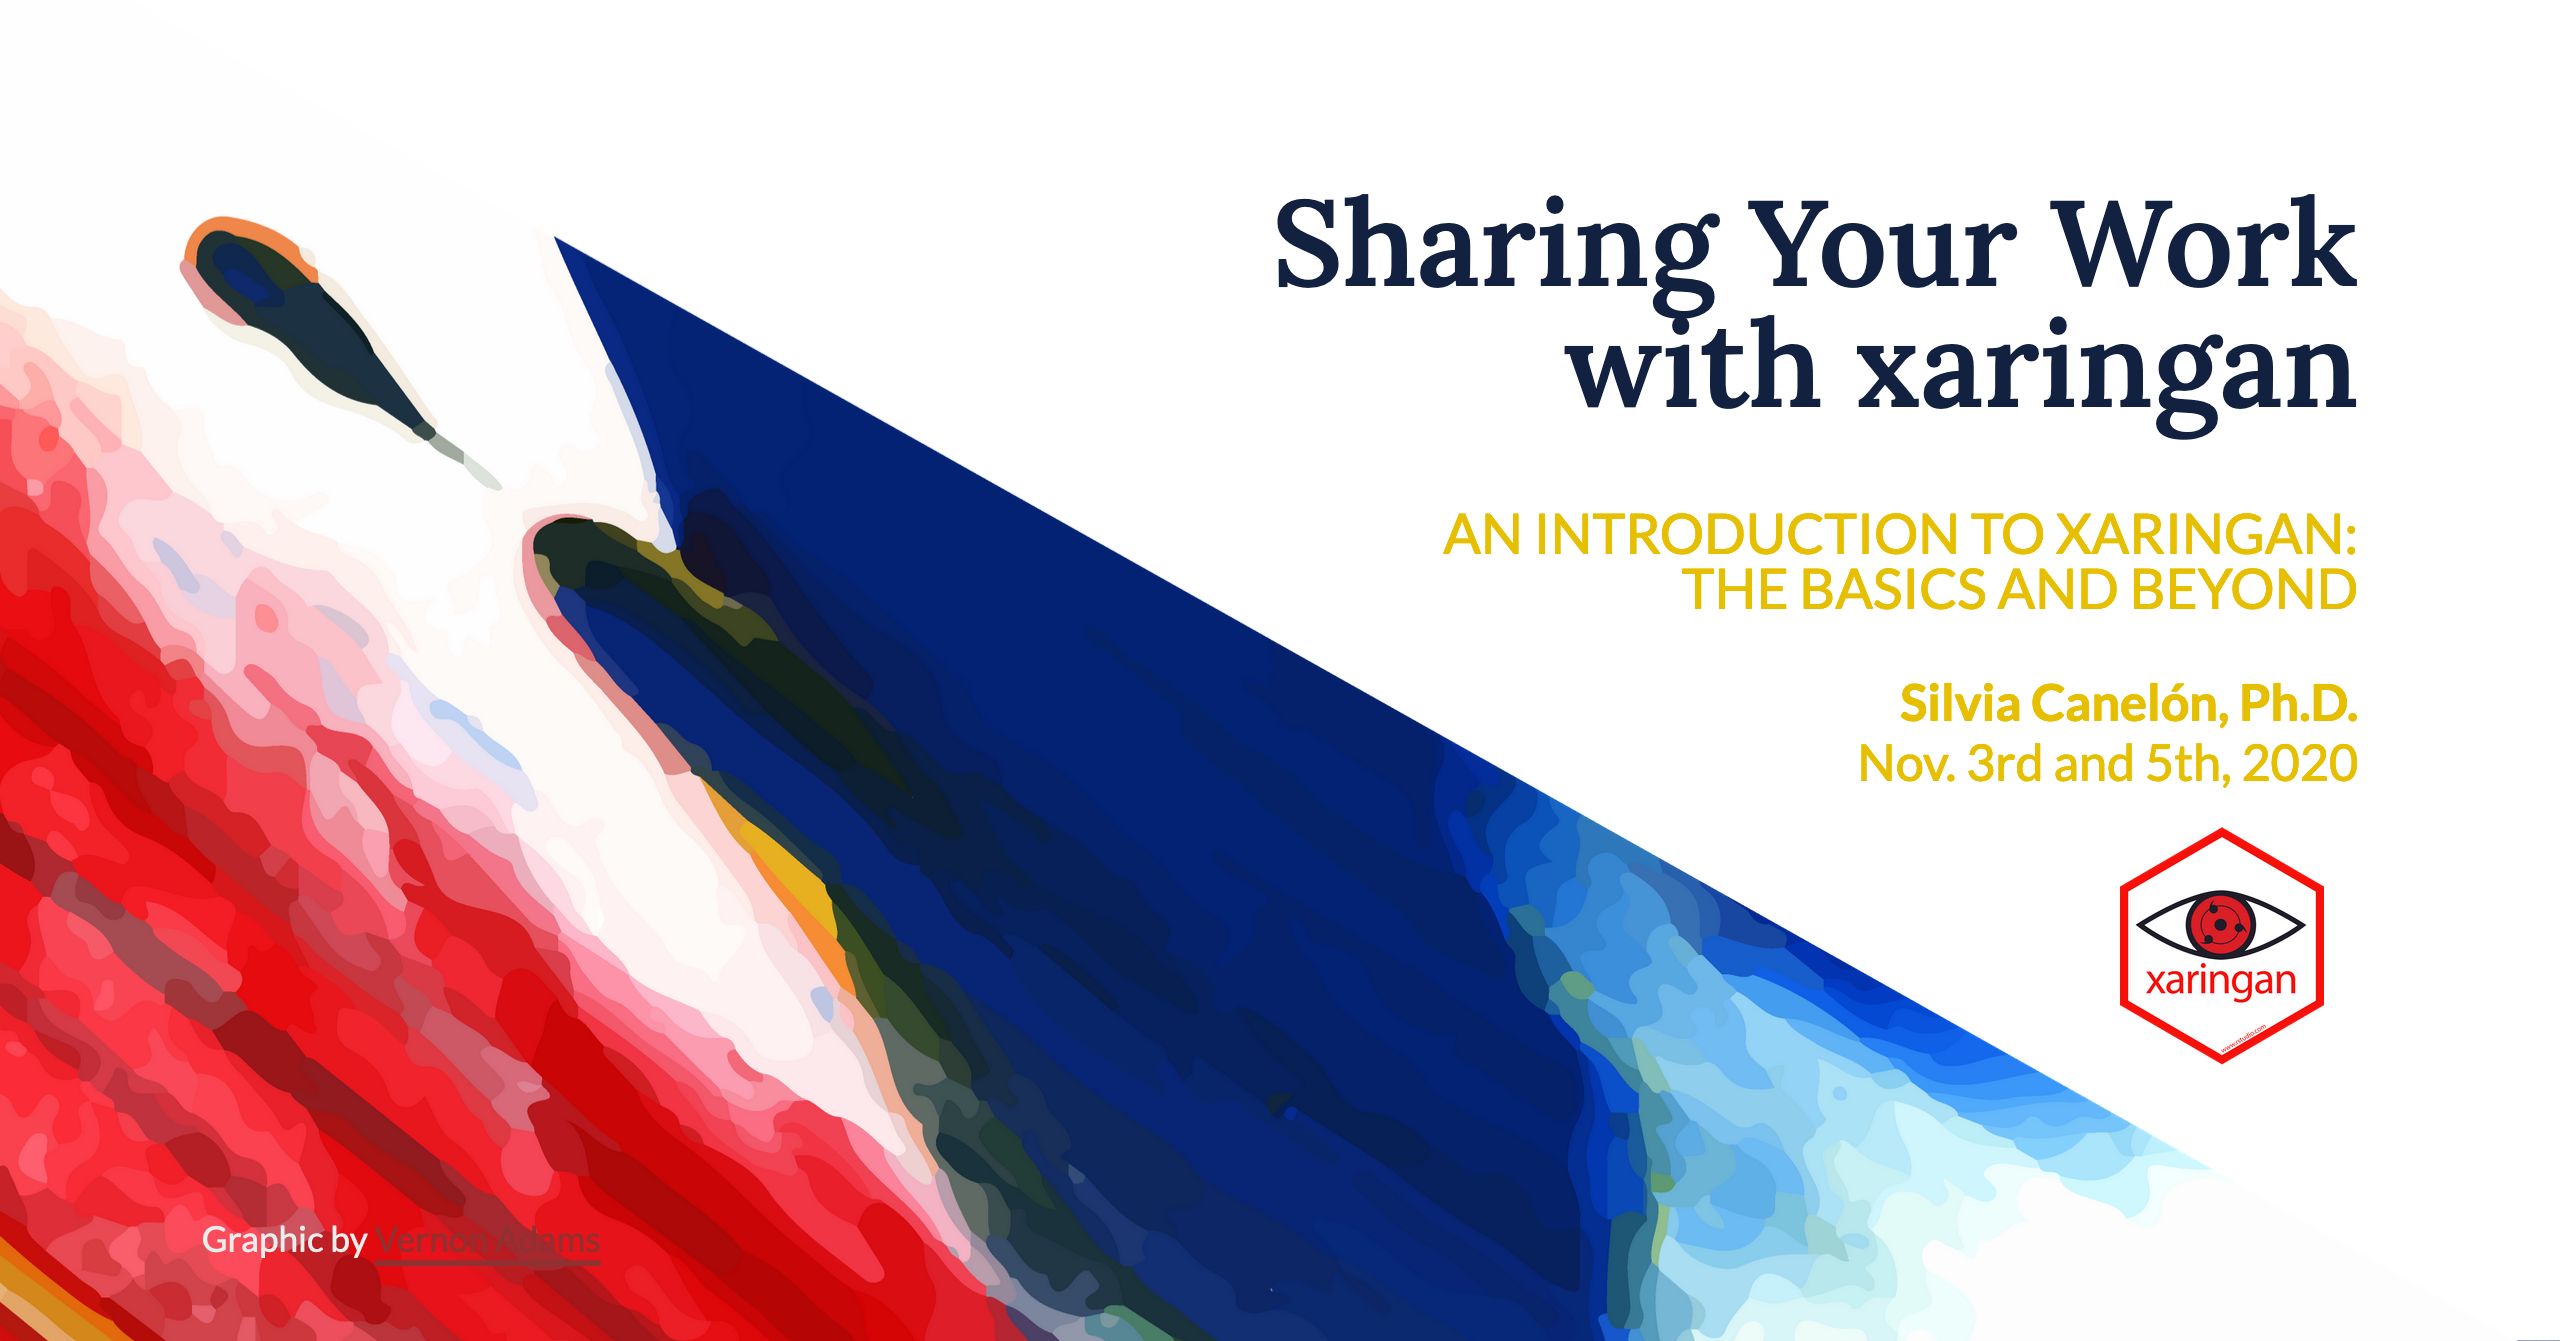 Cover image for the two day workshop with the title (same as this page) and the subtitle 'An Introduction to xaringan: the Basics and Beyond'. My name is listed as well as the dates November 3rd and 5th of 2020. The image features some blue, red, and yellow artwork in the background and the hex logo for the xaringan package in the lower right corner.